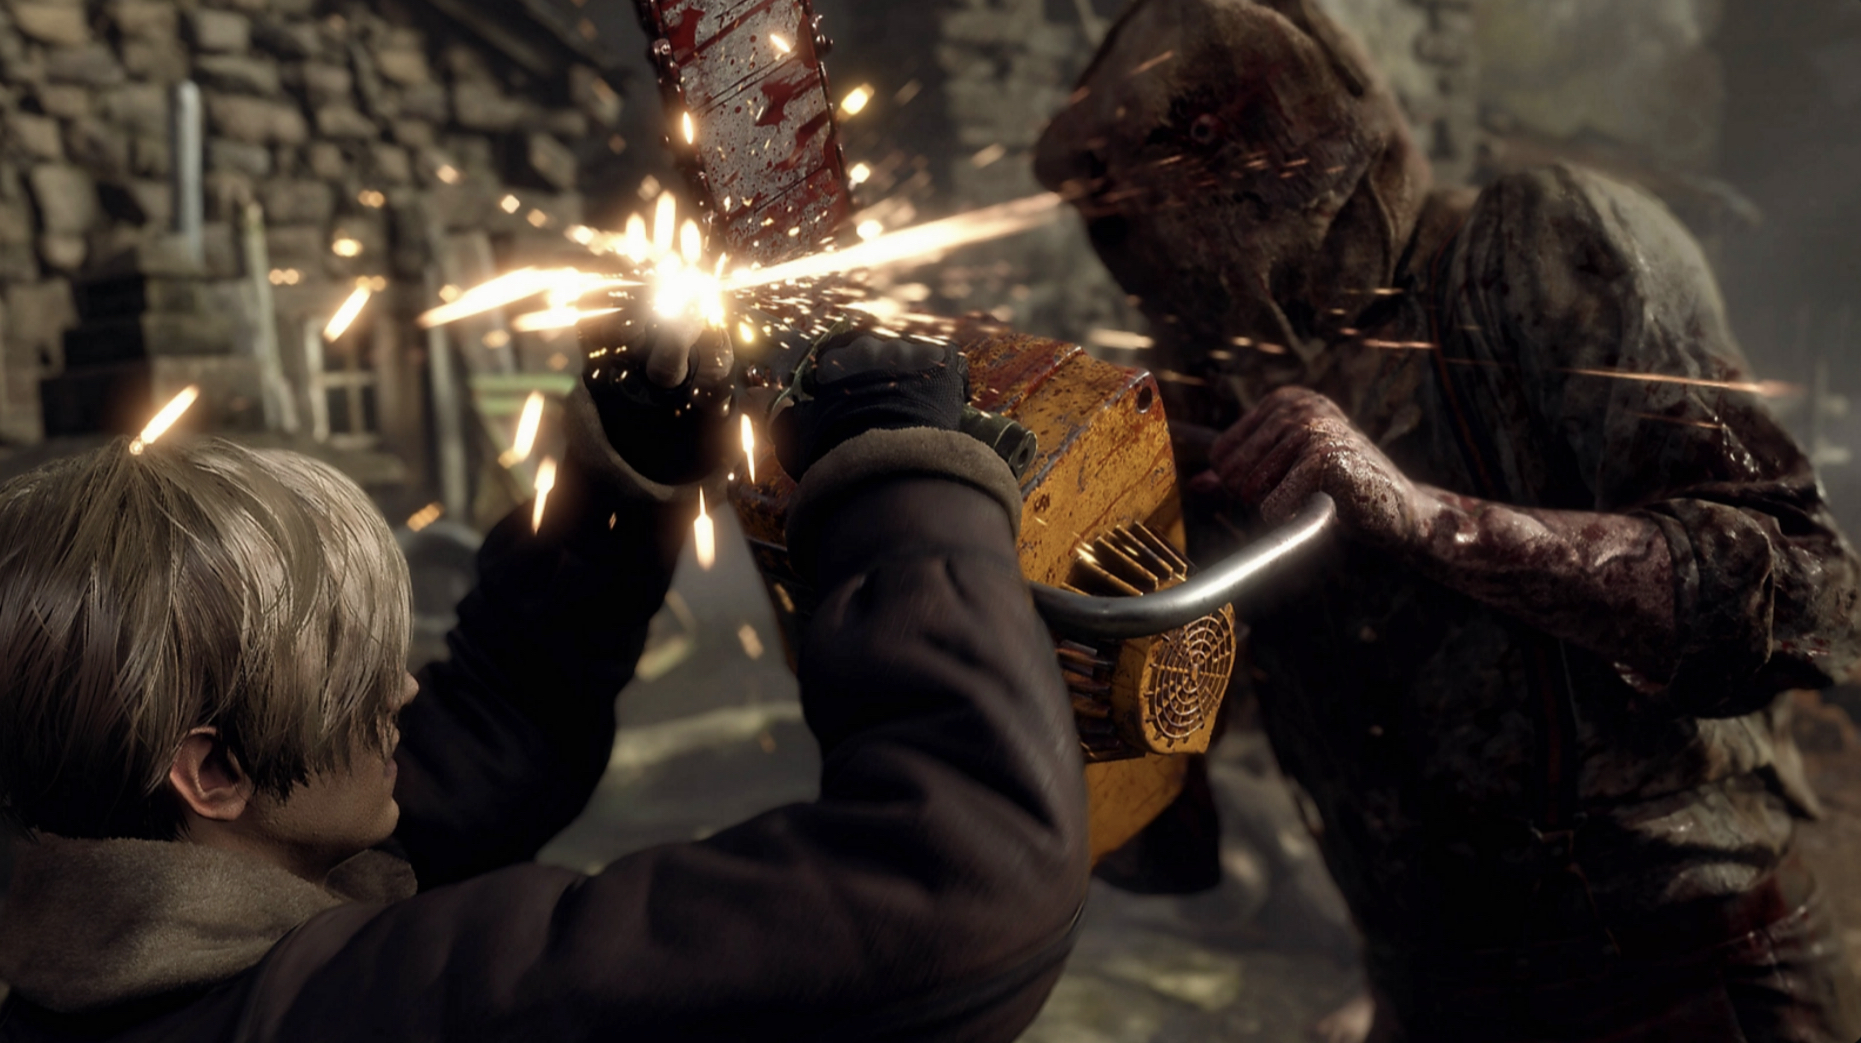 New Resident Evil 4 Update Seemingly Lowers Image Quality and